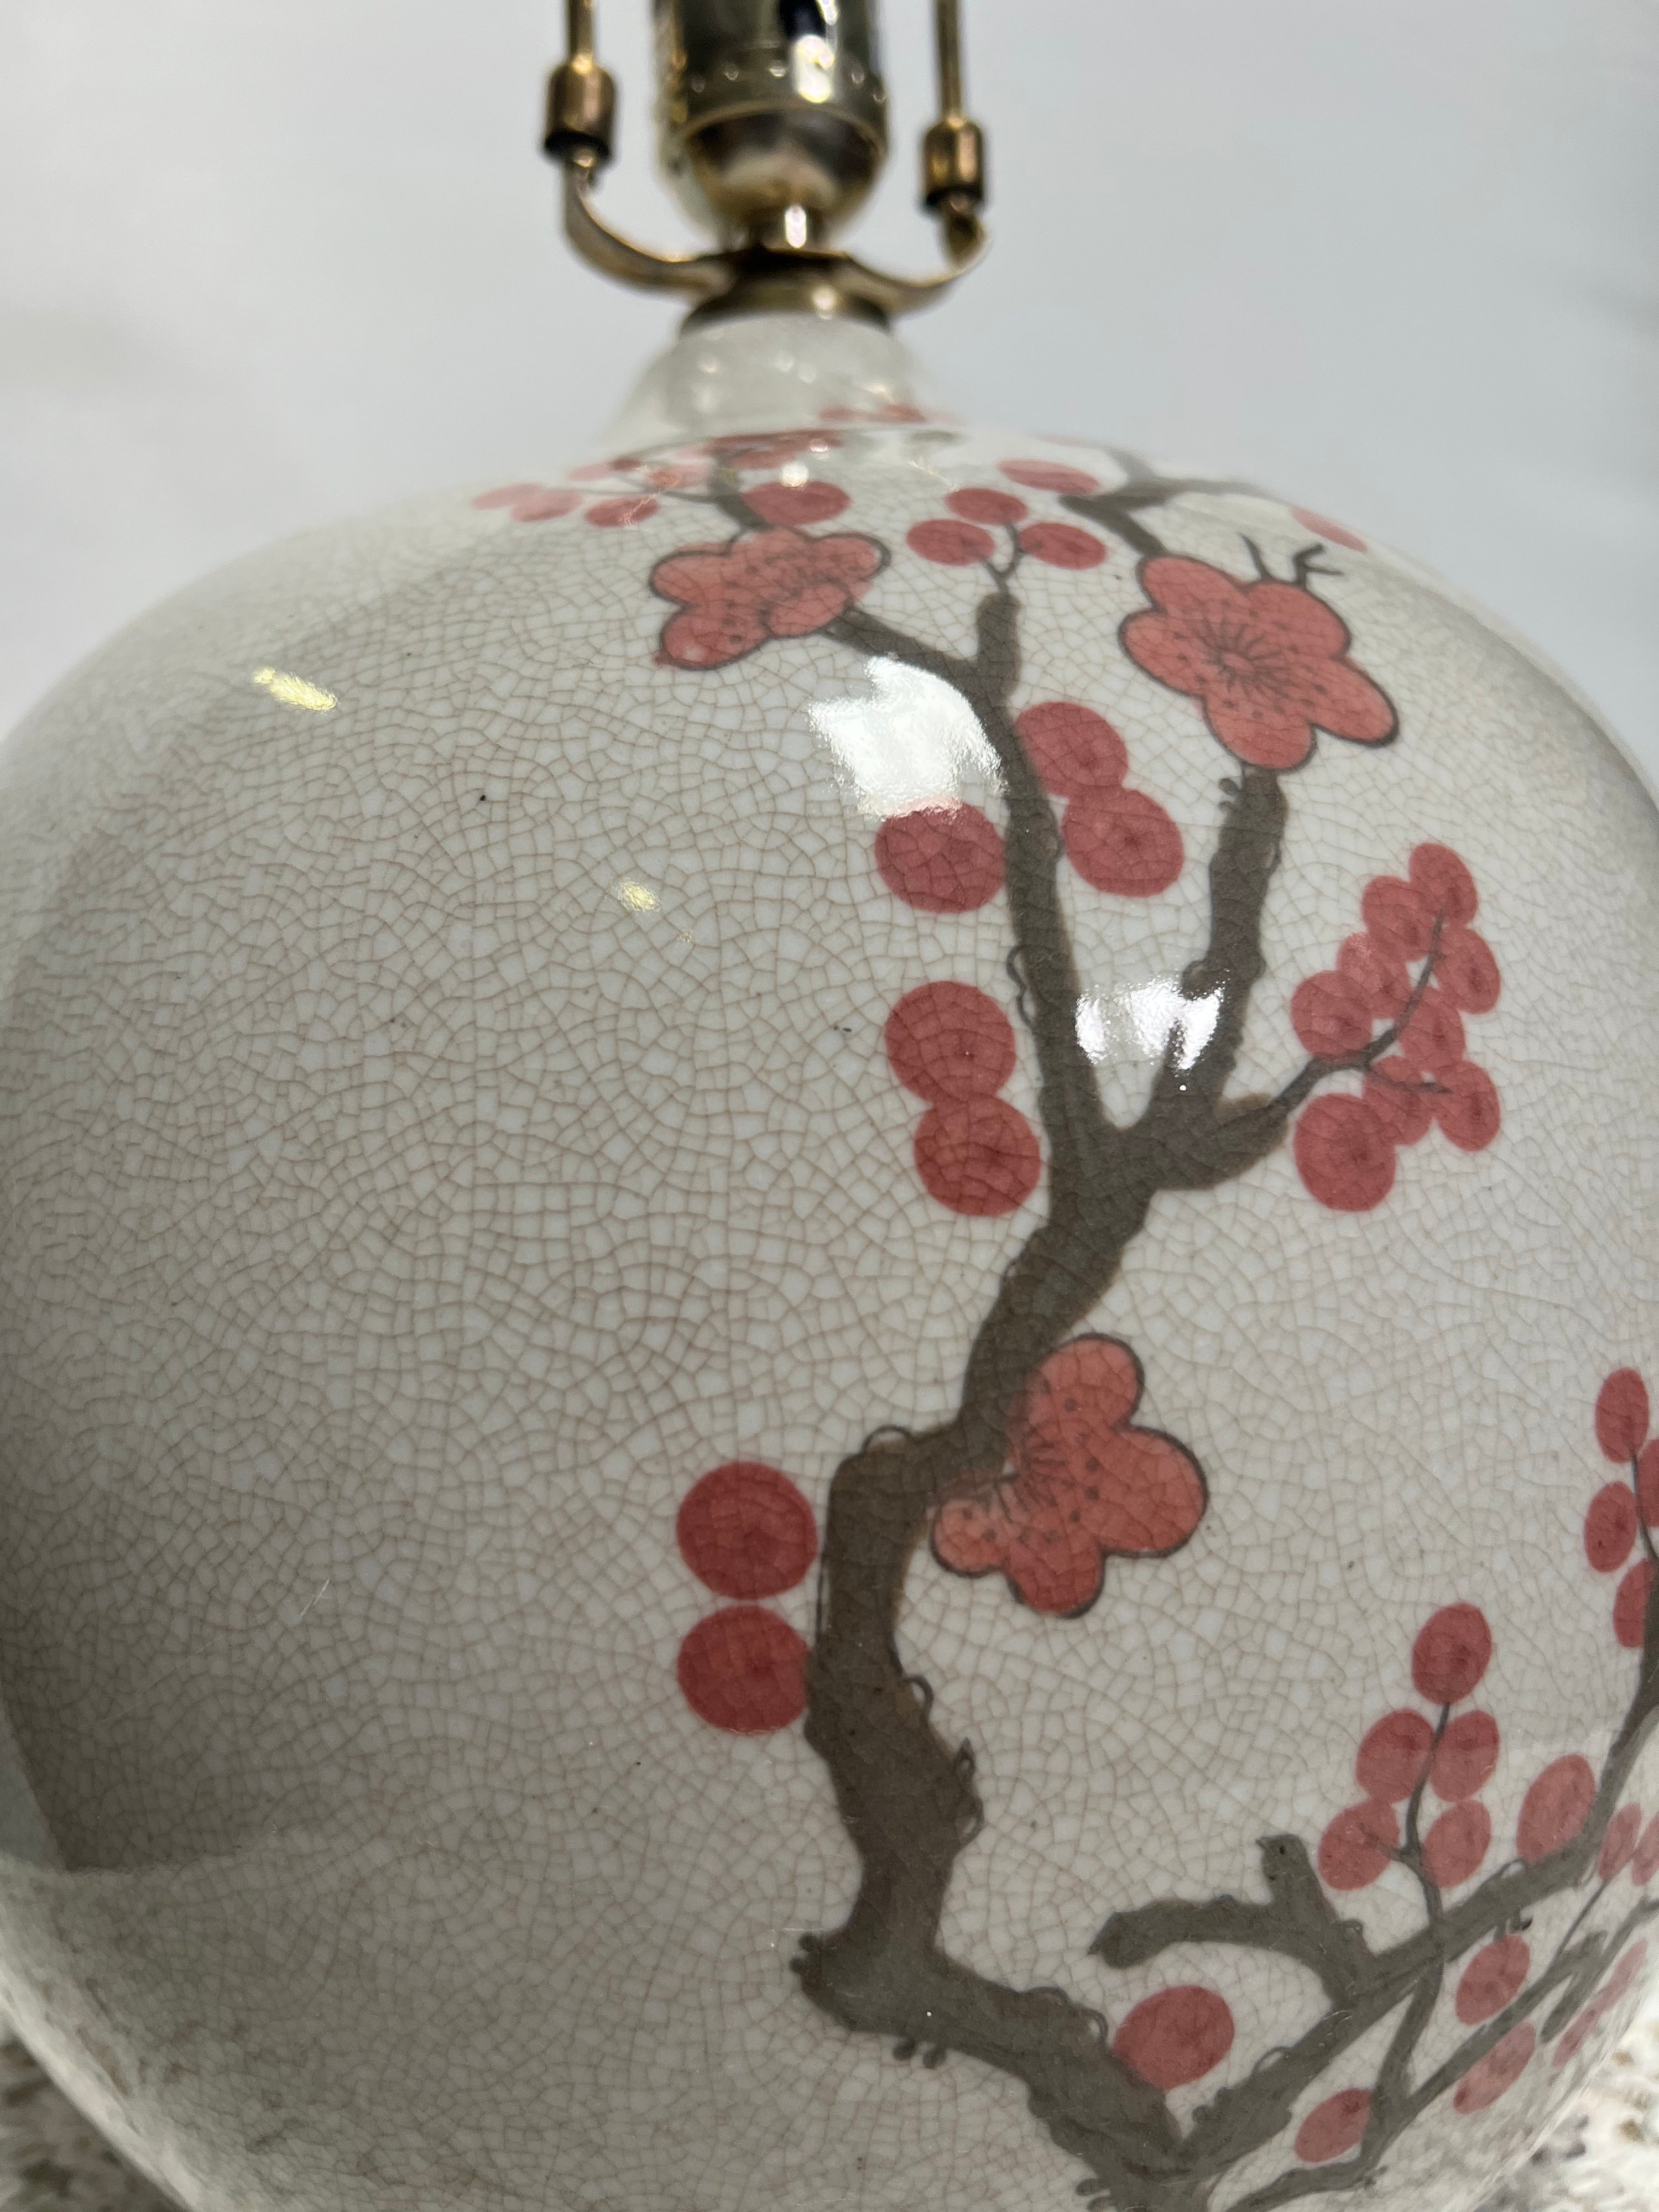 White and Red Cherry Blossom Lamp (Vintage)